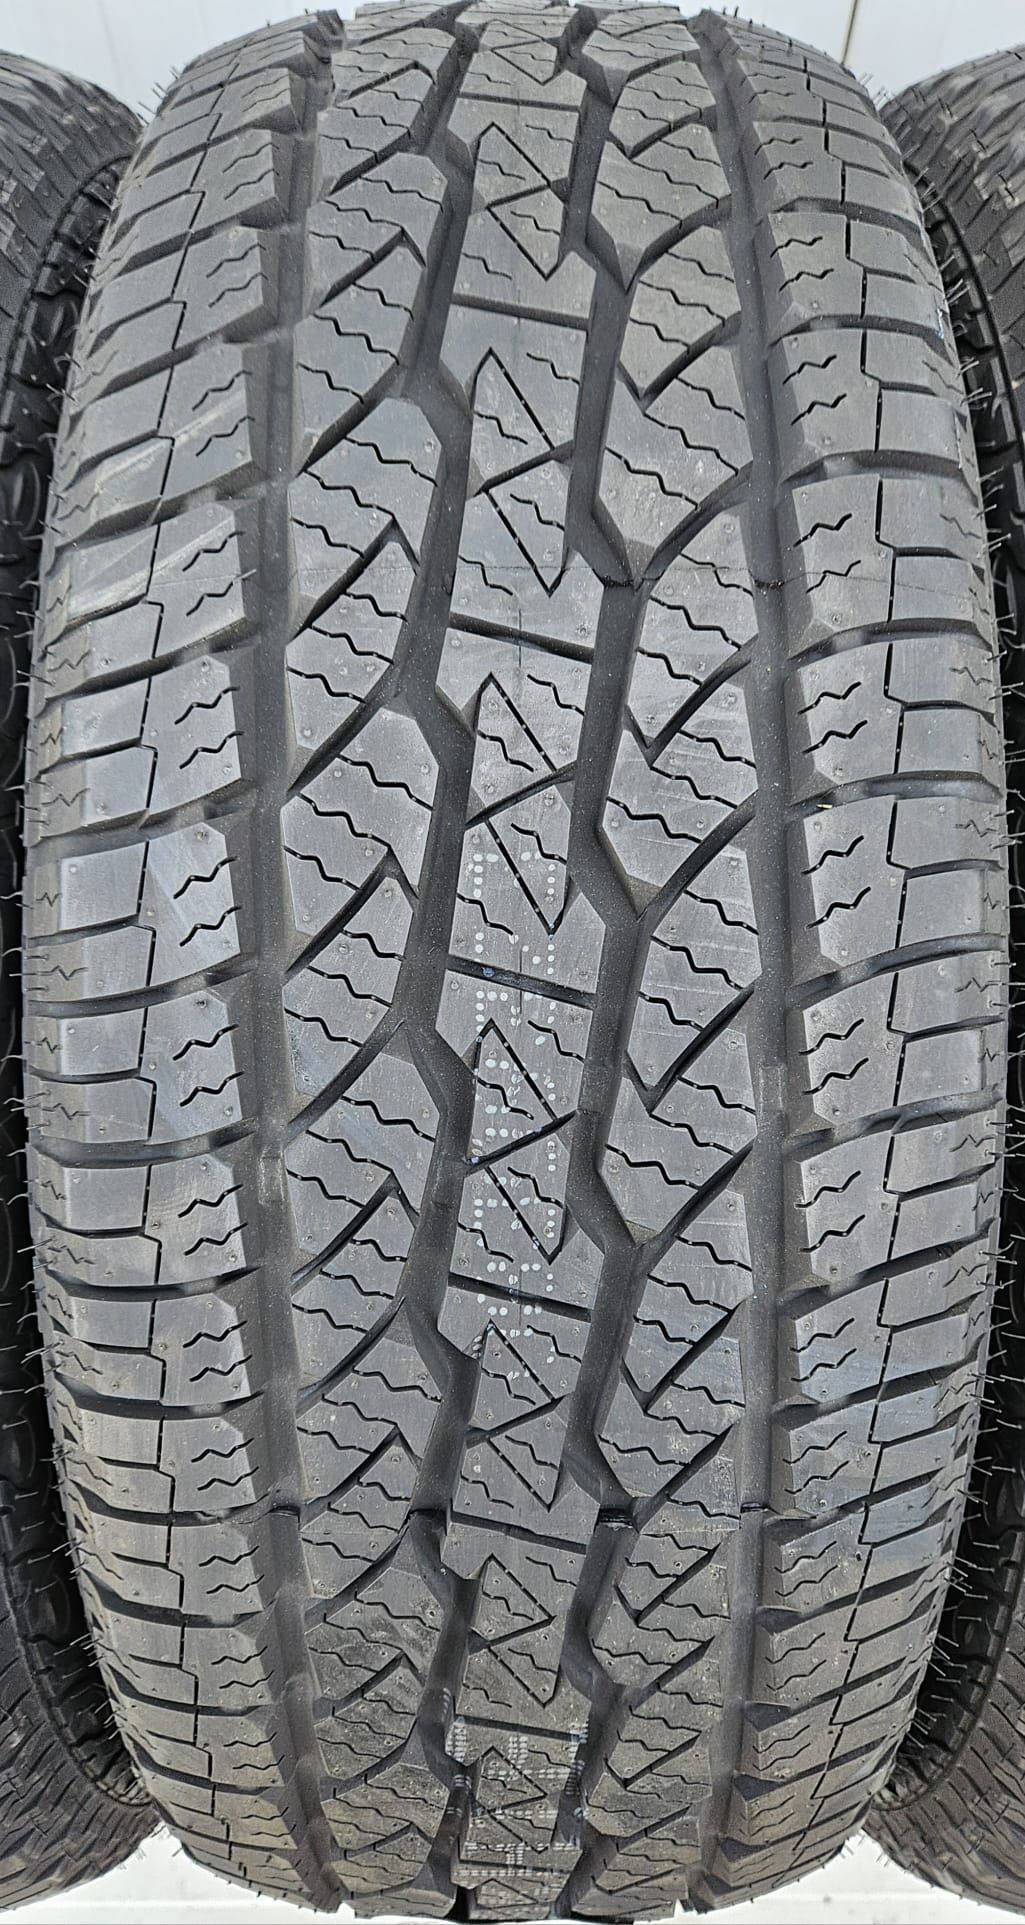 PROMO, 255/65 R17, 110H, MAXXIS, Anvelope All Terrain M+S